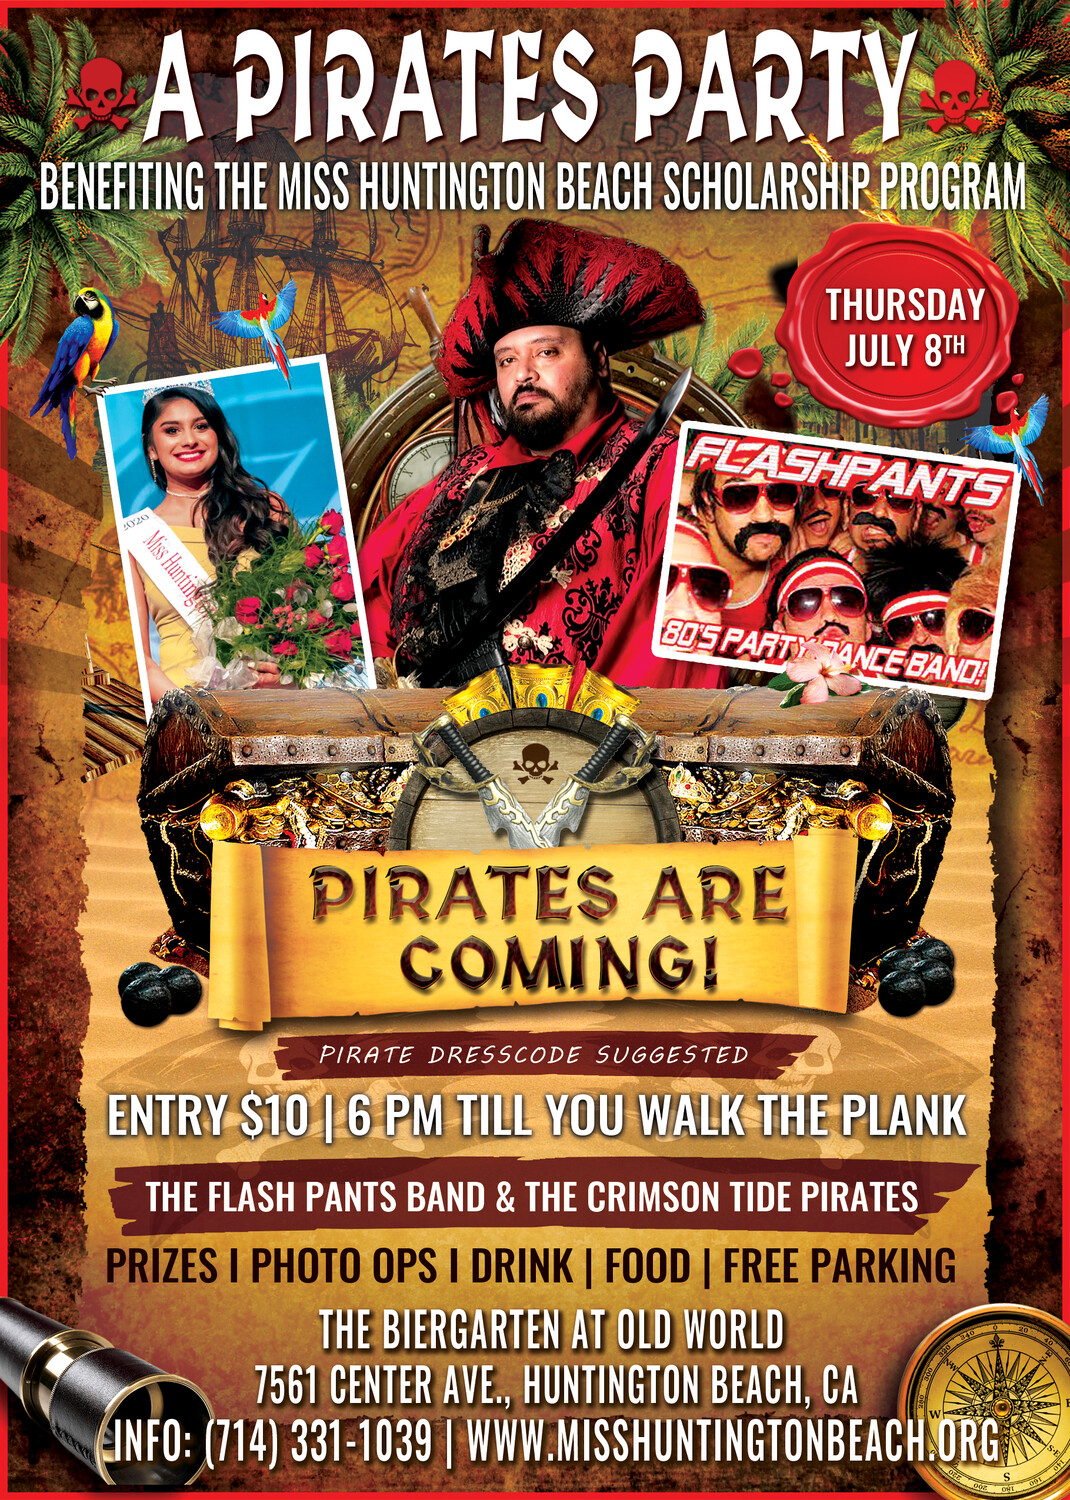 Tickets to A Pirates Party